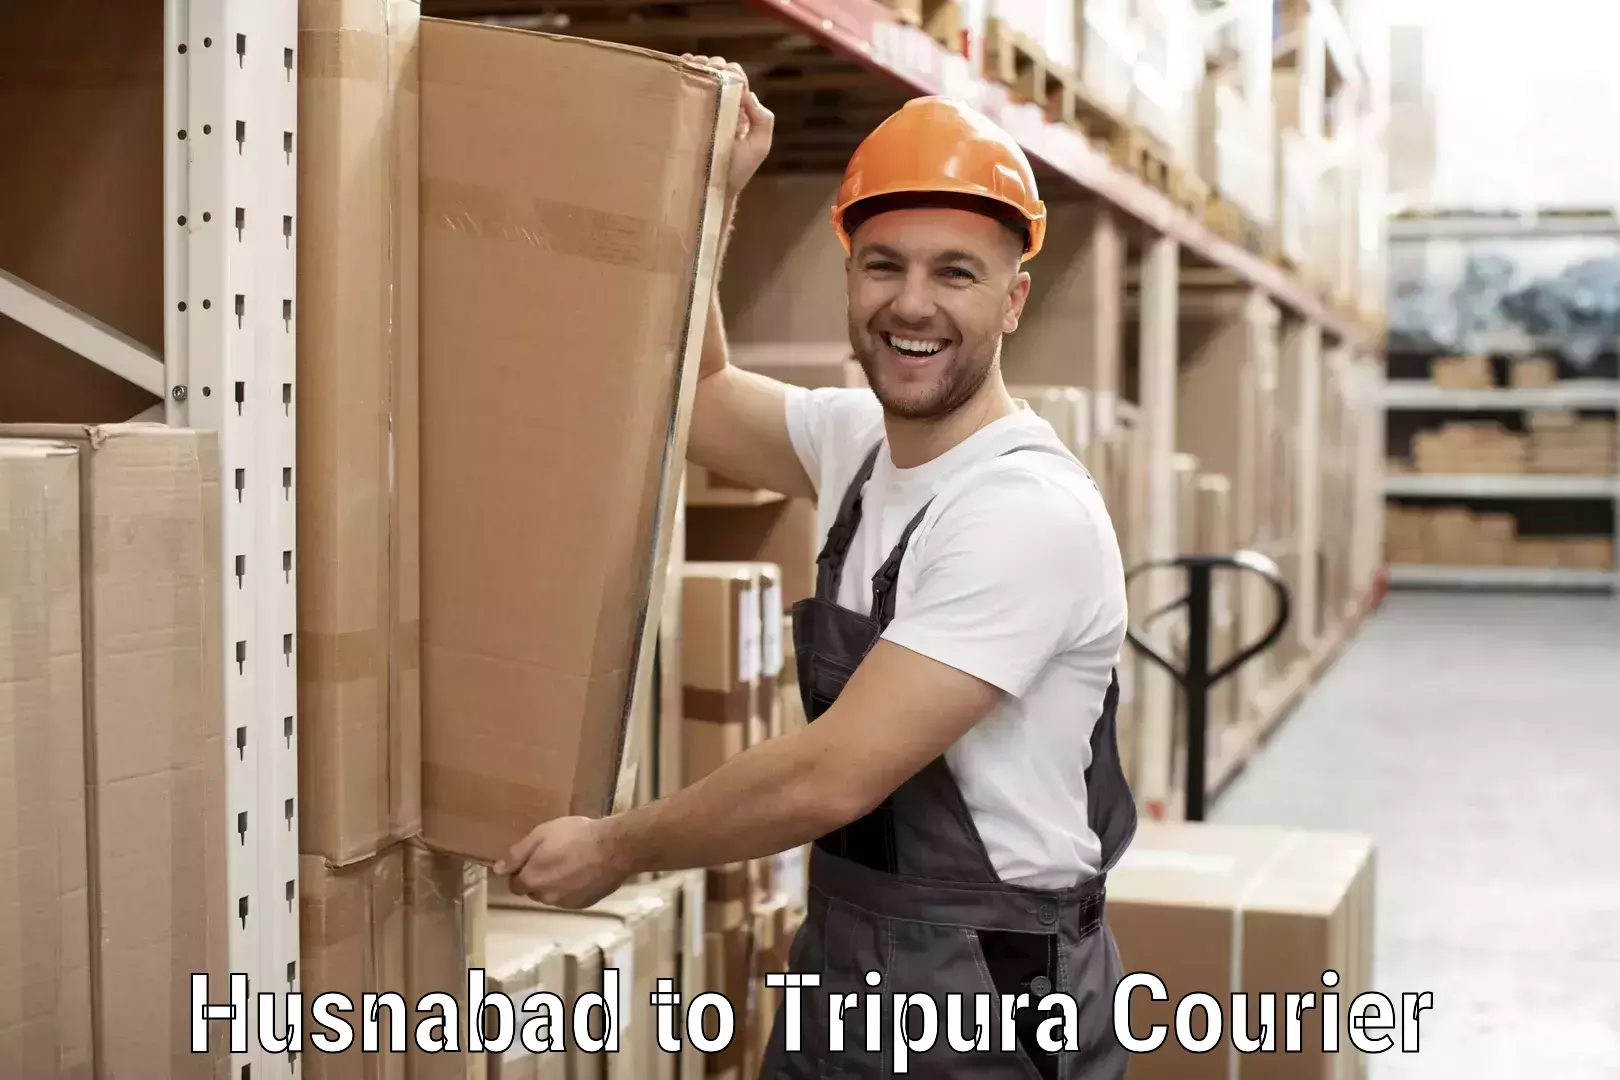 Urban courier service Husnabad to Udaipur Tripura